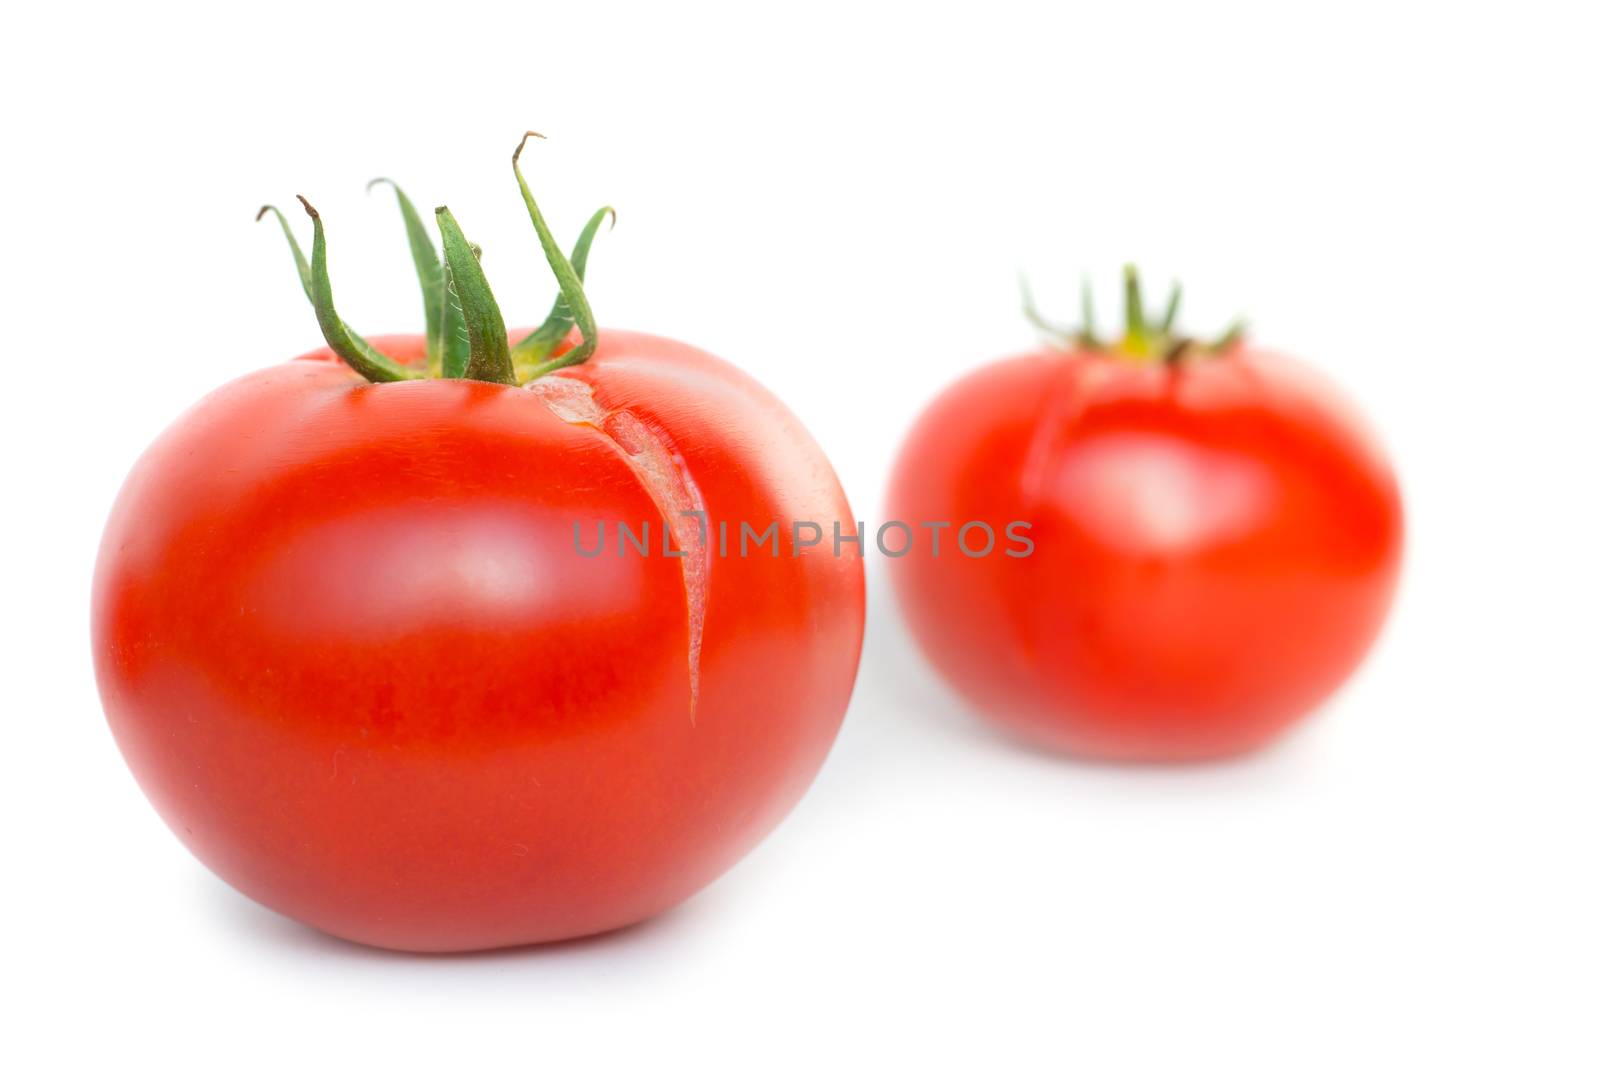 Two red fresh tomatoes by vapi